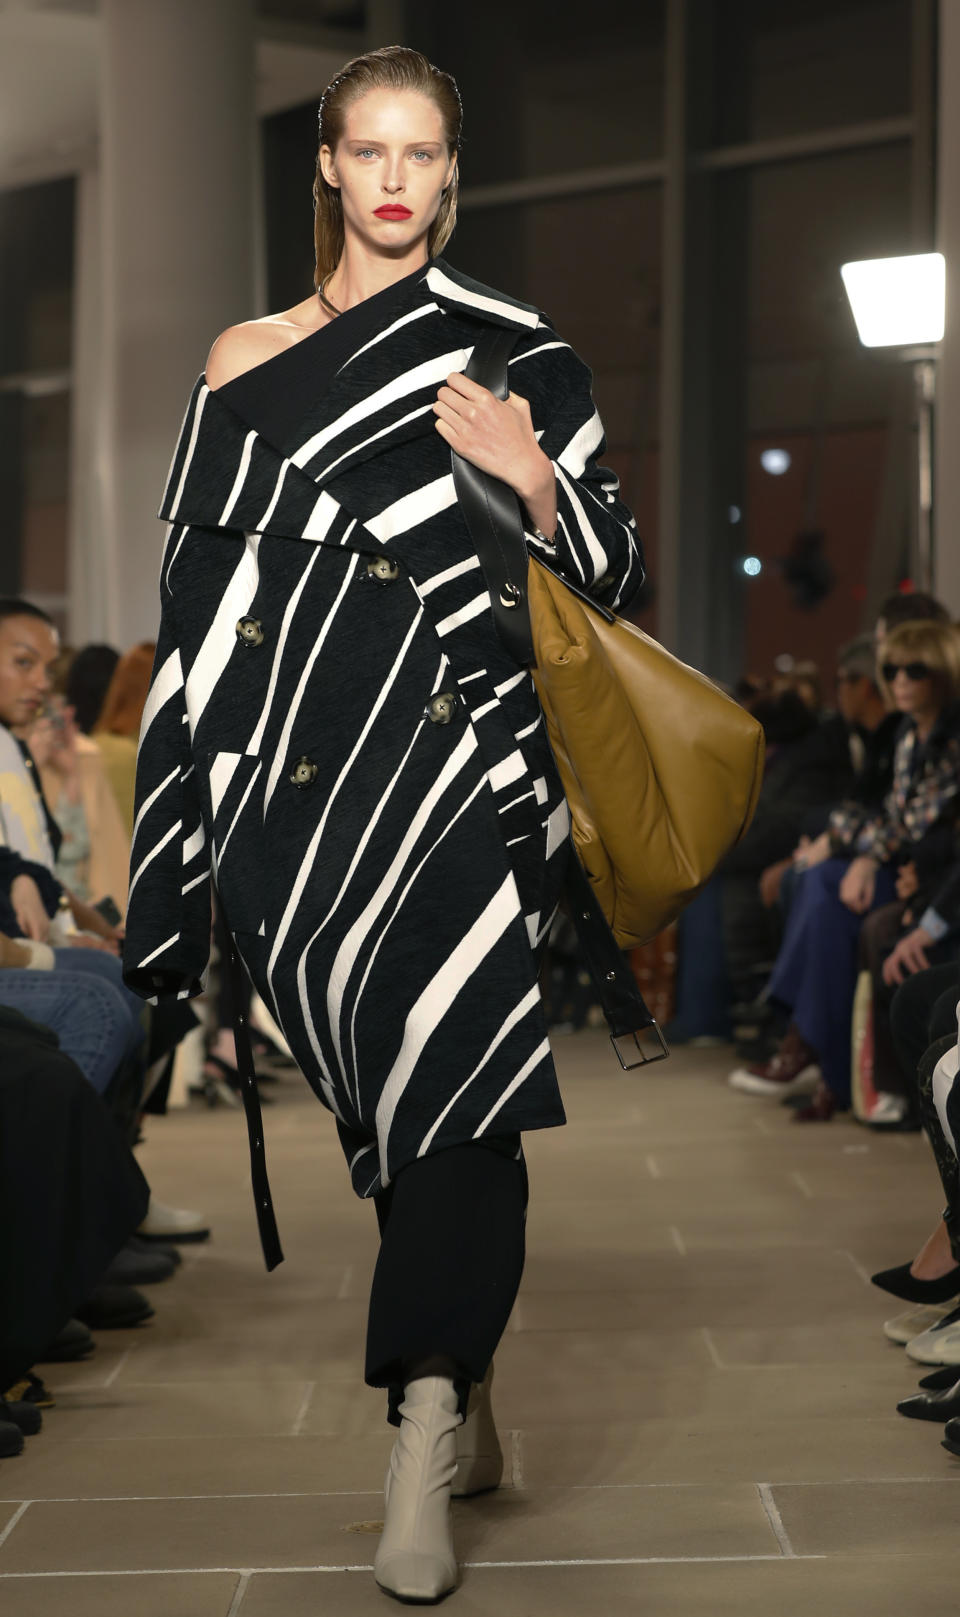 The Proenza Schouler Fall Winter collection 2020 is modeled, Monday, Feb. 10, 2020, during Fashion Week in New York. (AP Photo/Kathy Willens)